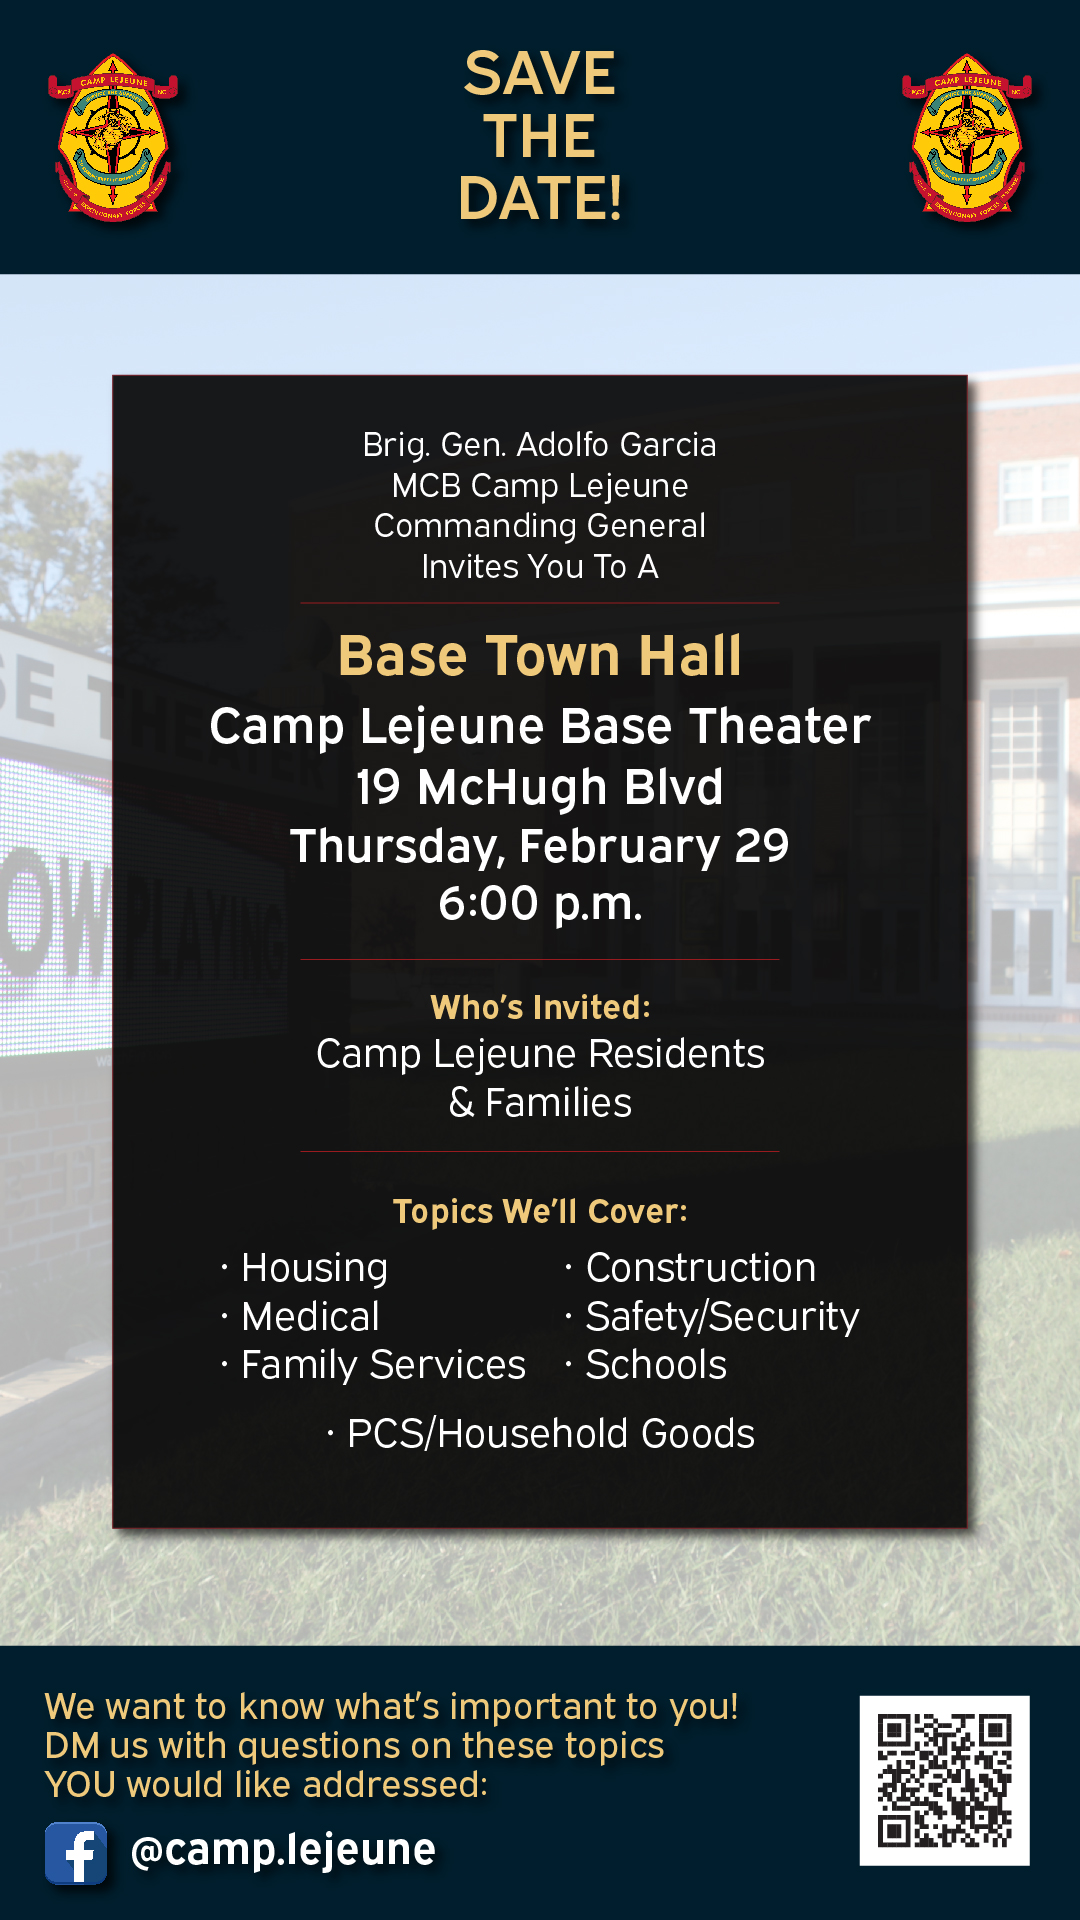 Save the Date: Camp Lejeune Base Town Hall